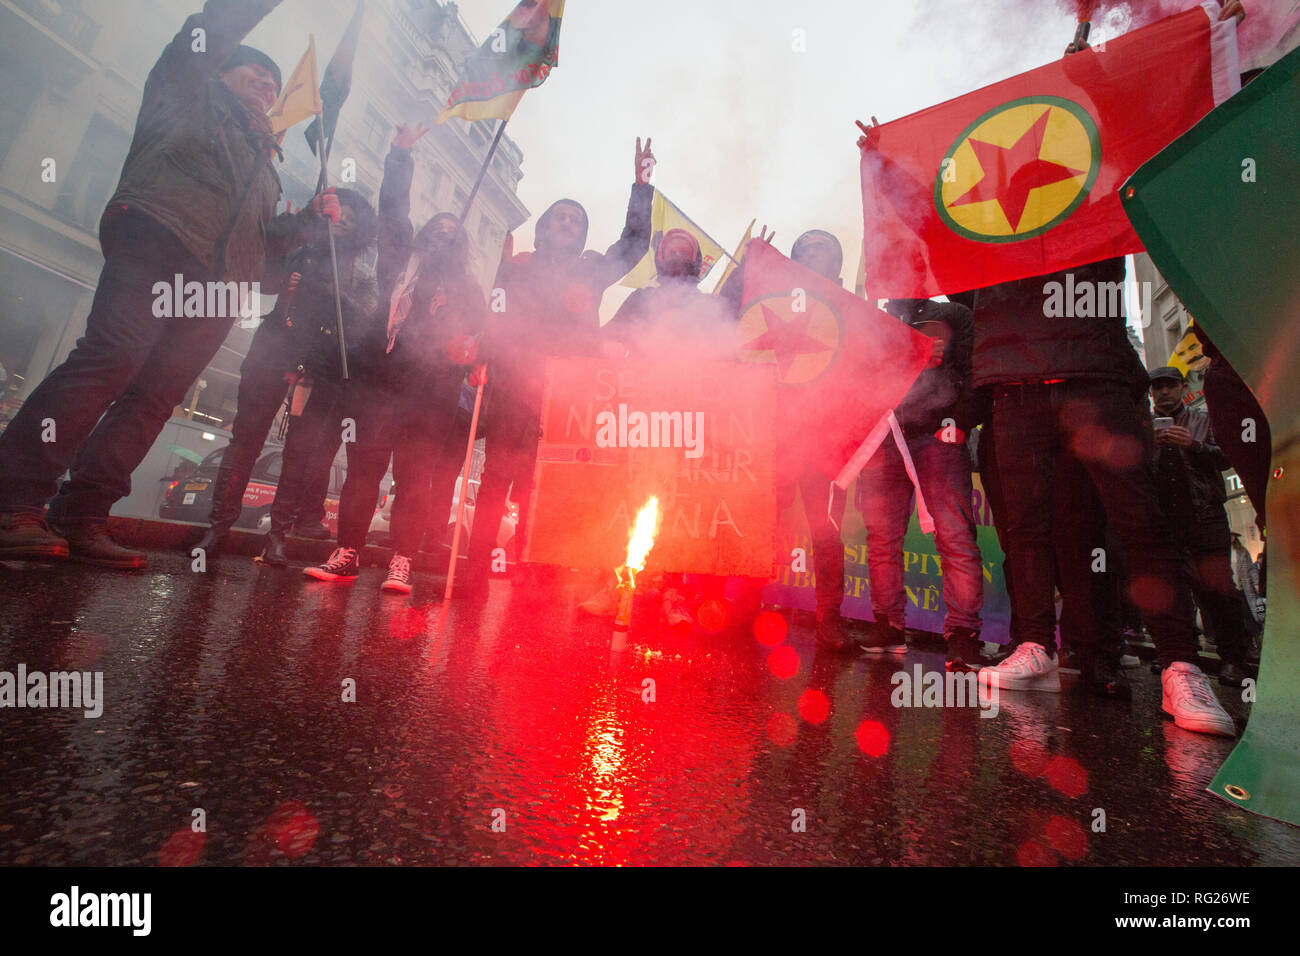 London, UK. 27th January 2019 .Pro Kurdistan protesters march from Portland place to Trafalgar Square to demonstrate against Turkey's alleged support of Islamic State. Credit: George Cracknell Wright/Alamy Live News Stock Photo